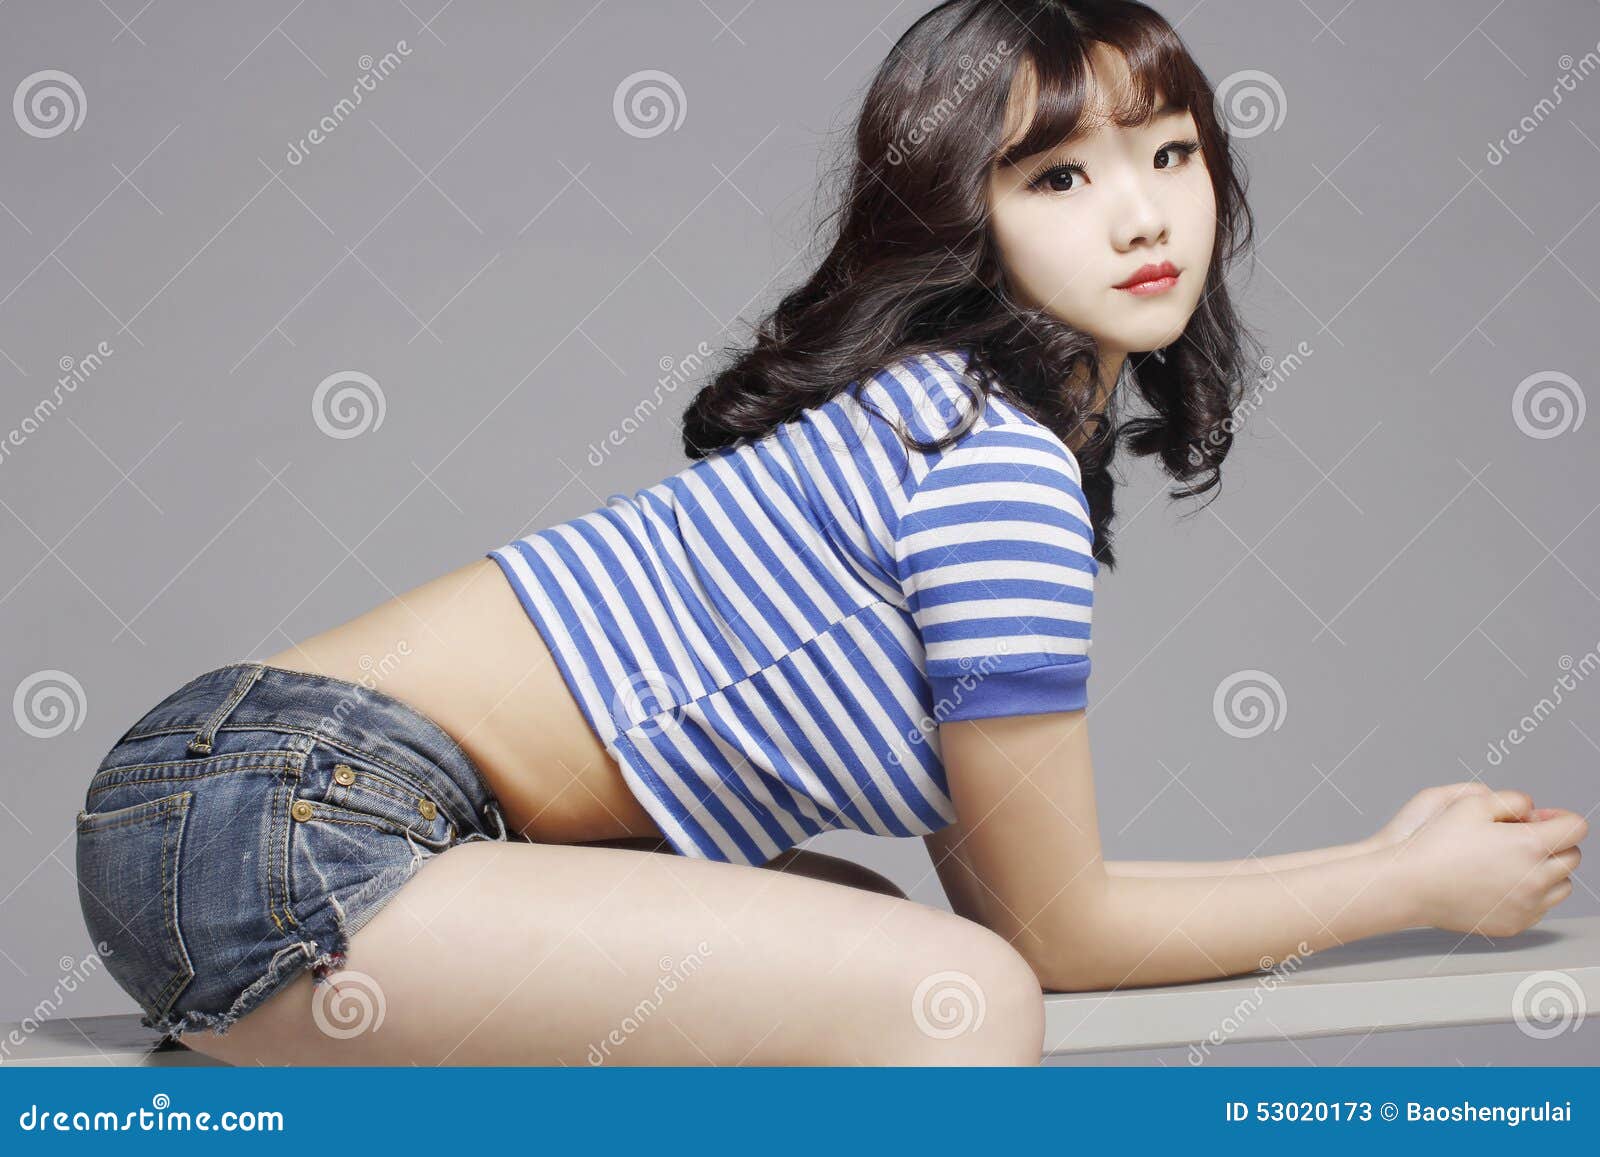 1,081 Girl Wearing Hot Pants Stock Photos - Free & Royalty-Free Stock  Photos from Dreamstime